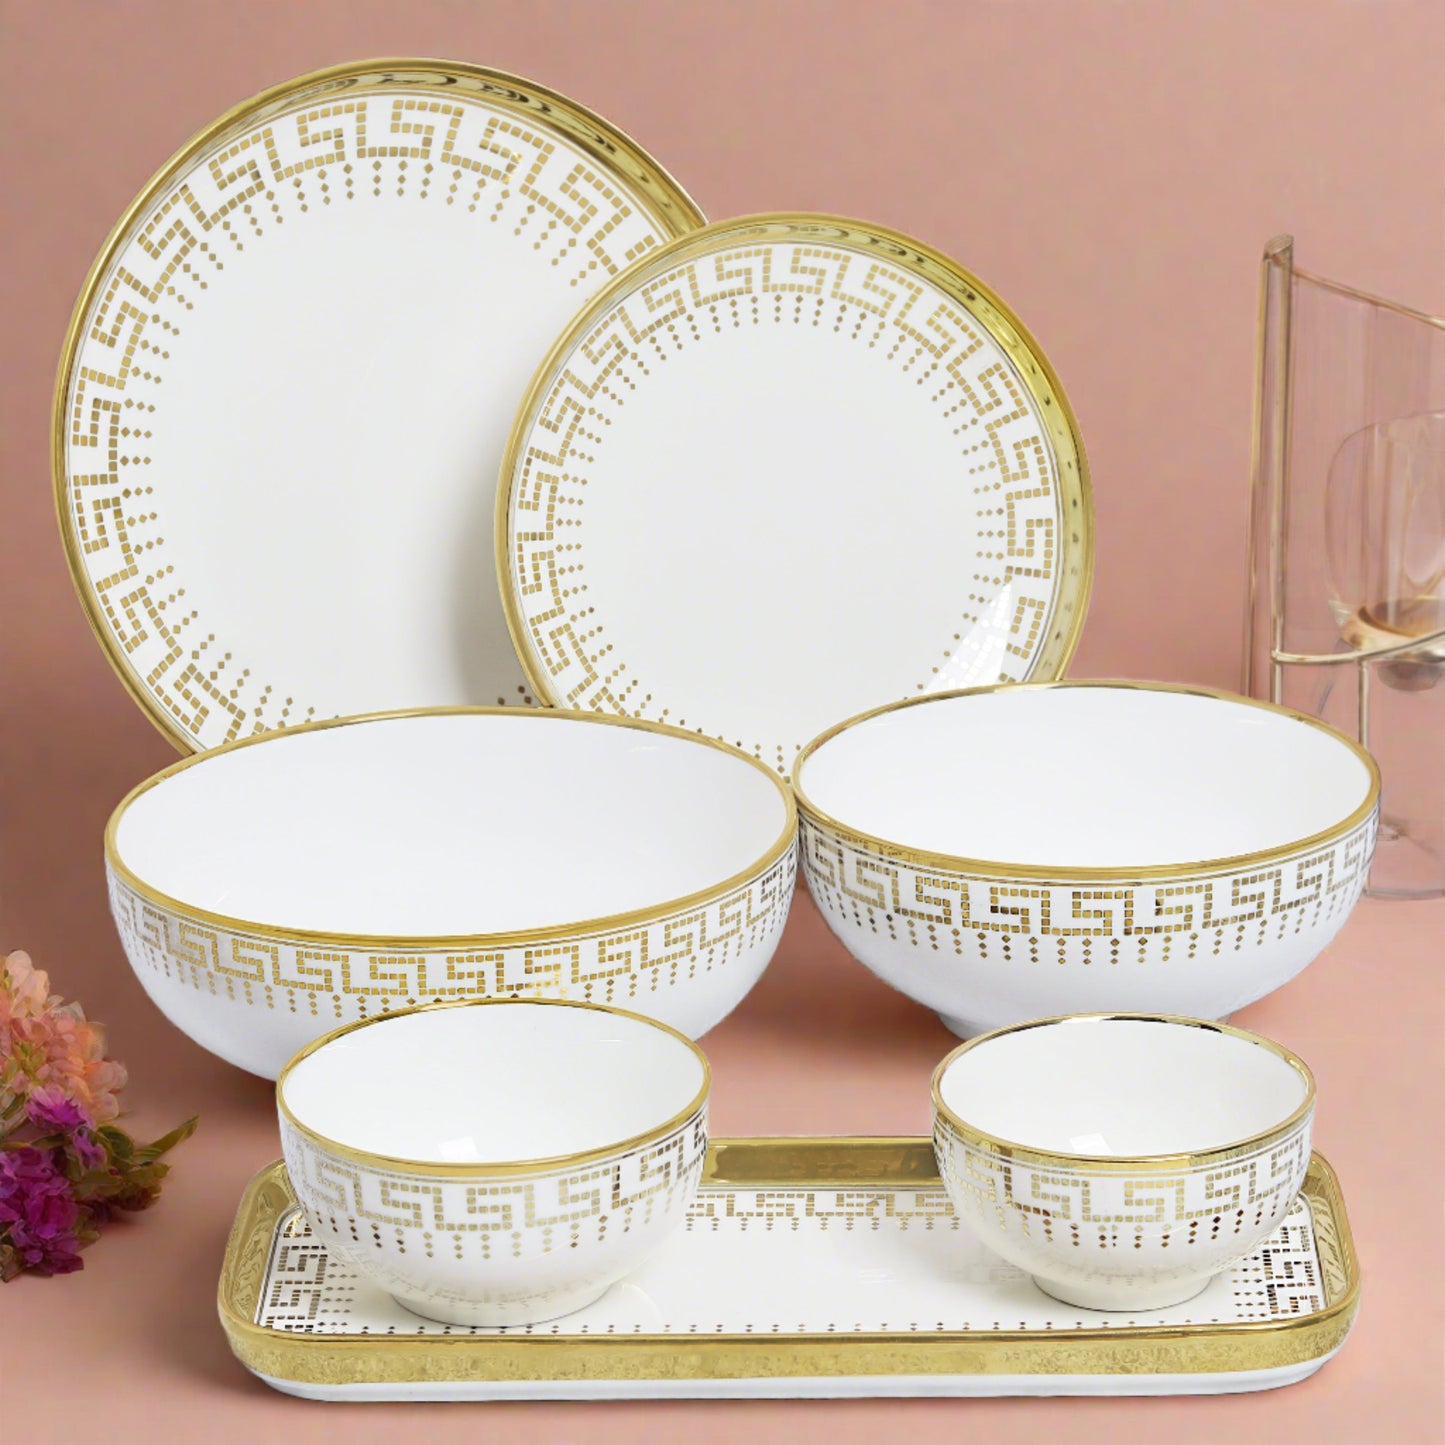 Complete 34-piece ceramic dinner set - ideal for elegant dining and entertaining.